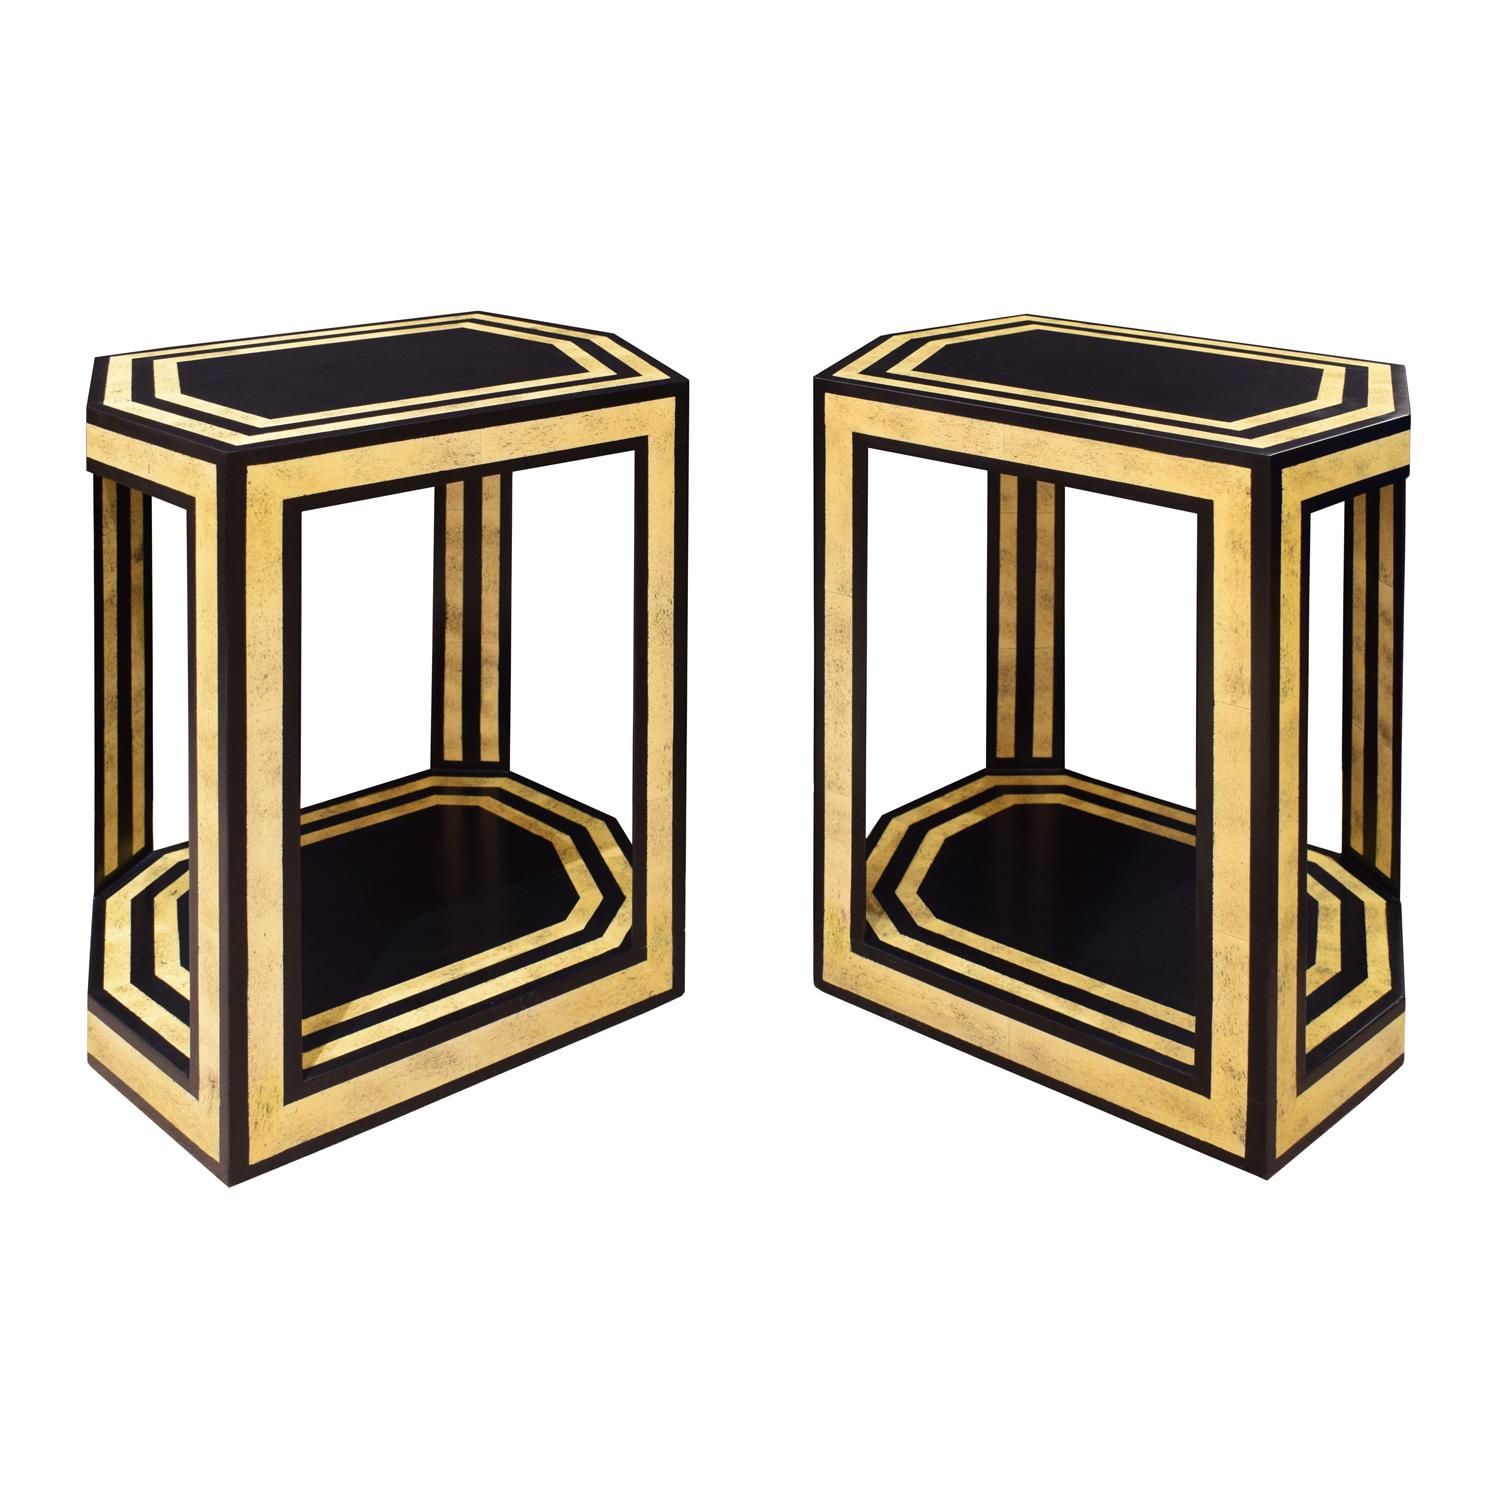 Pair of exceptional hexagonal side tables in black lacquer with bone inlays on the top, sides and bottom by Karl Springer, American 1970's. These end tables showcase the meticulous craftsmanship artistry that Karl Springer is famous for.